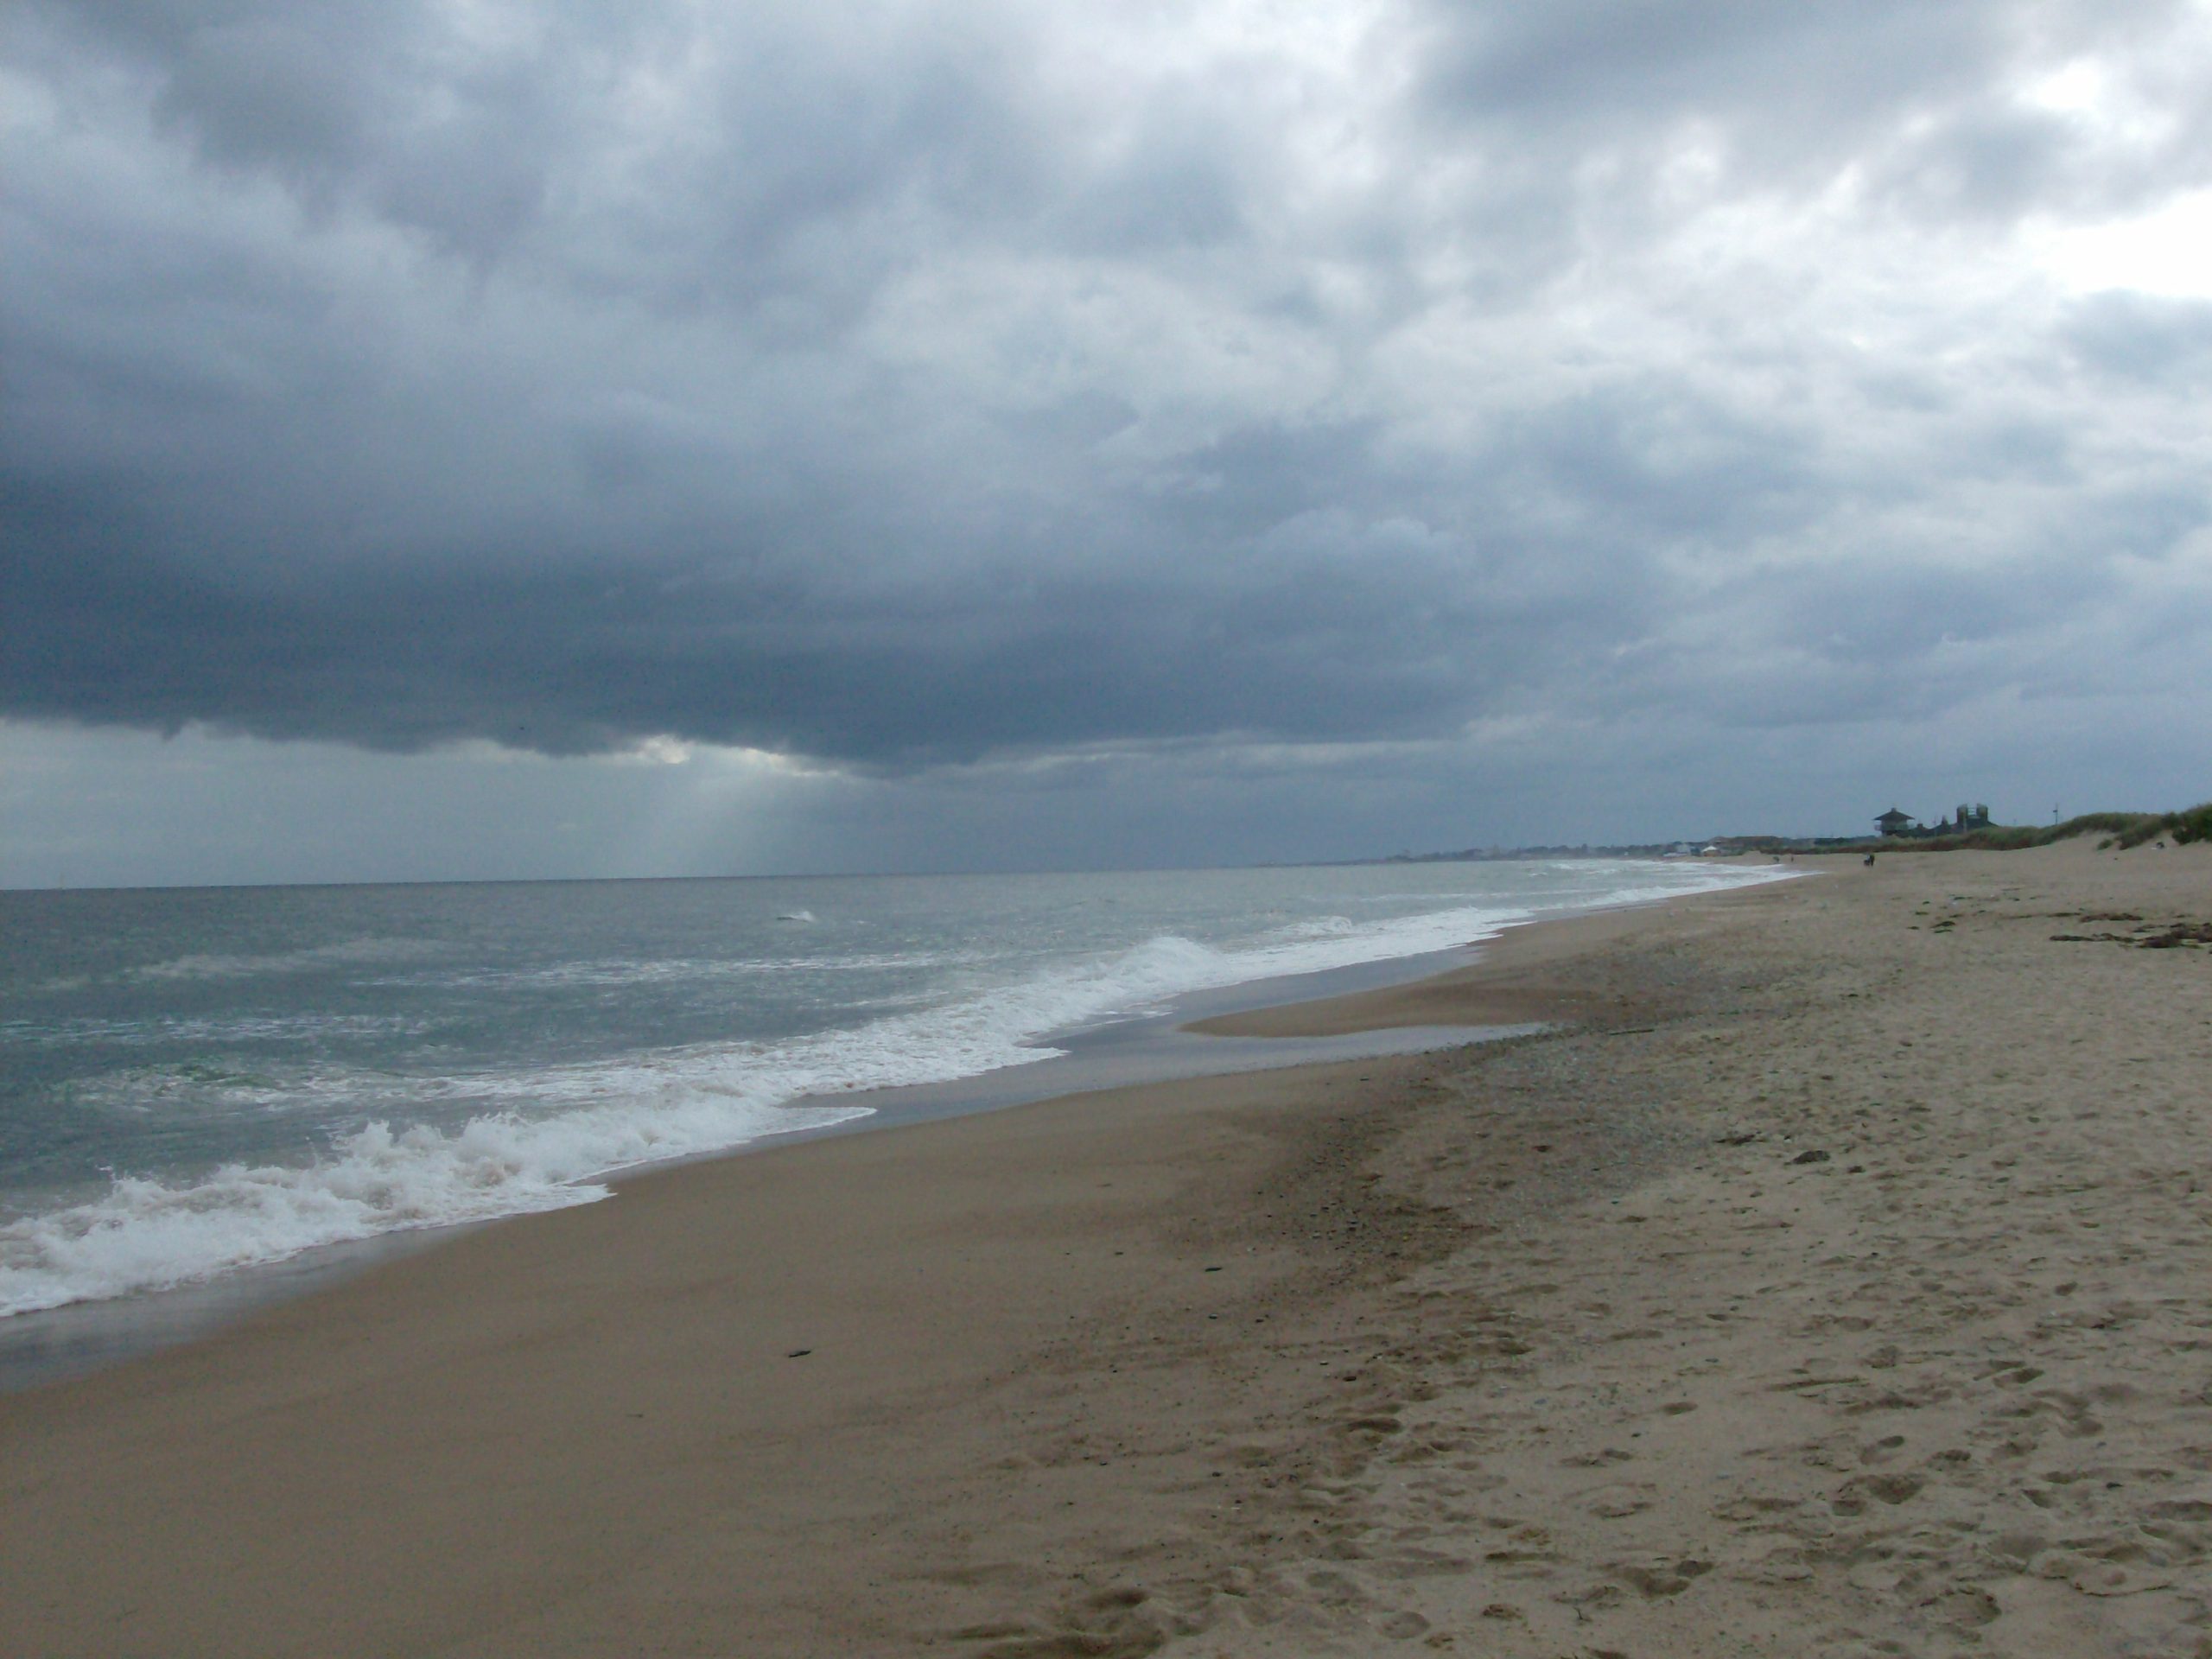 Deserted Misquamicut Beach, Rhode Island (user submitted)